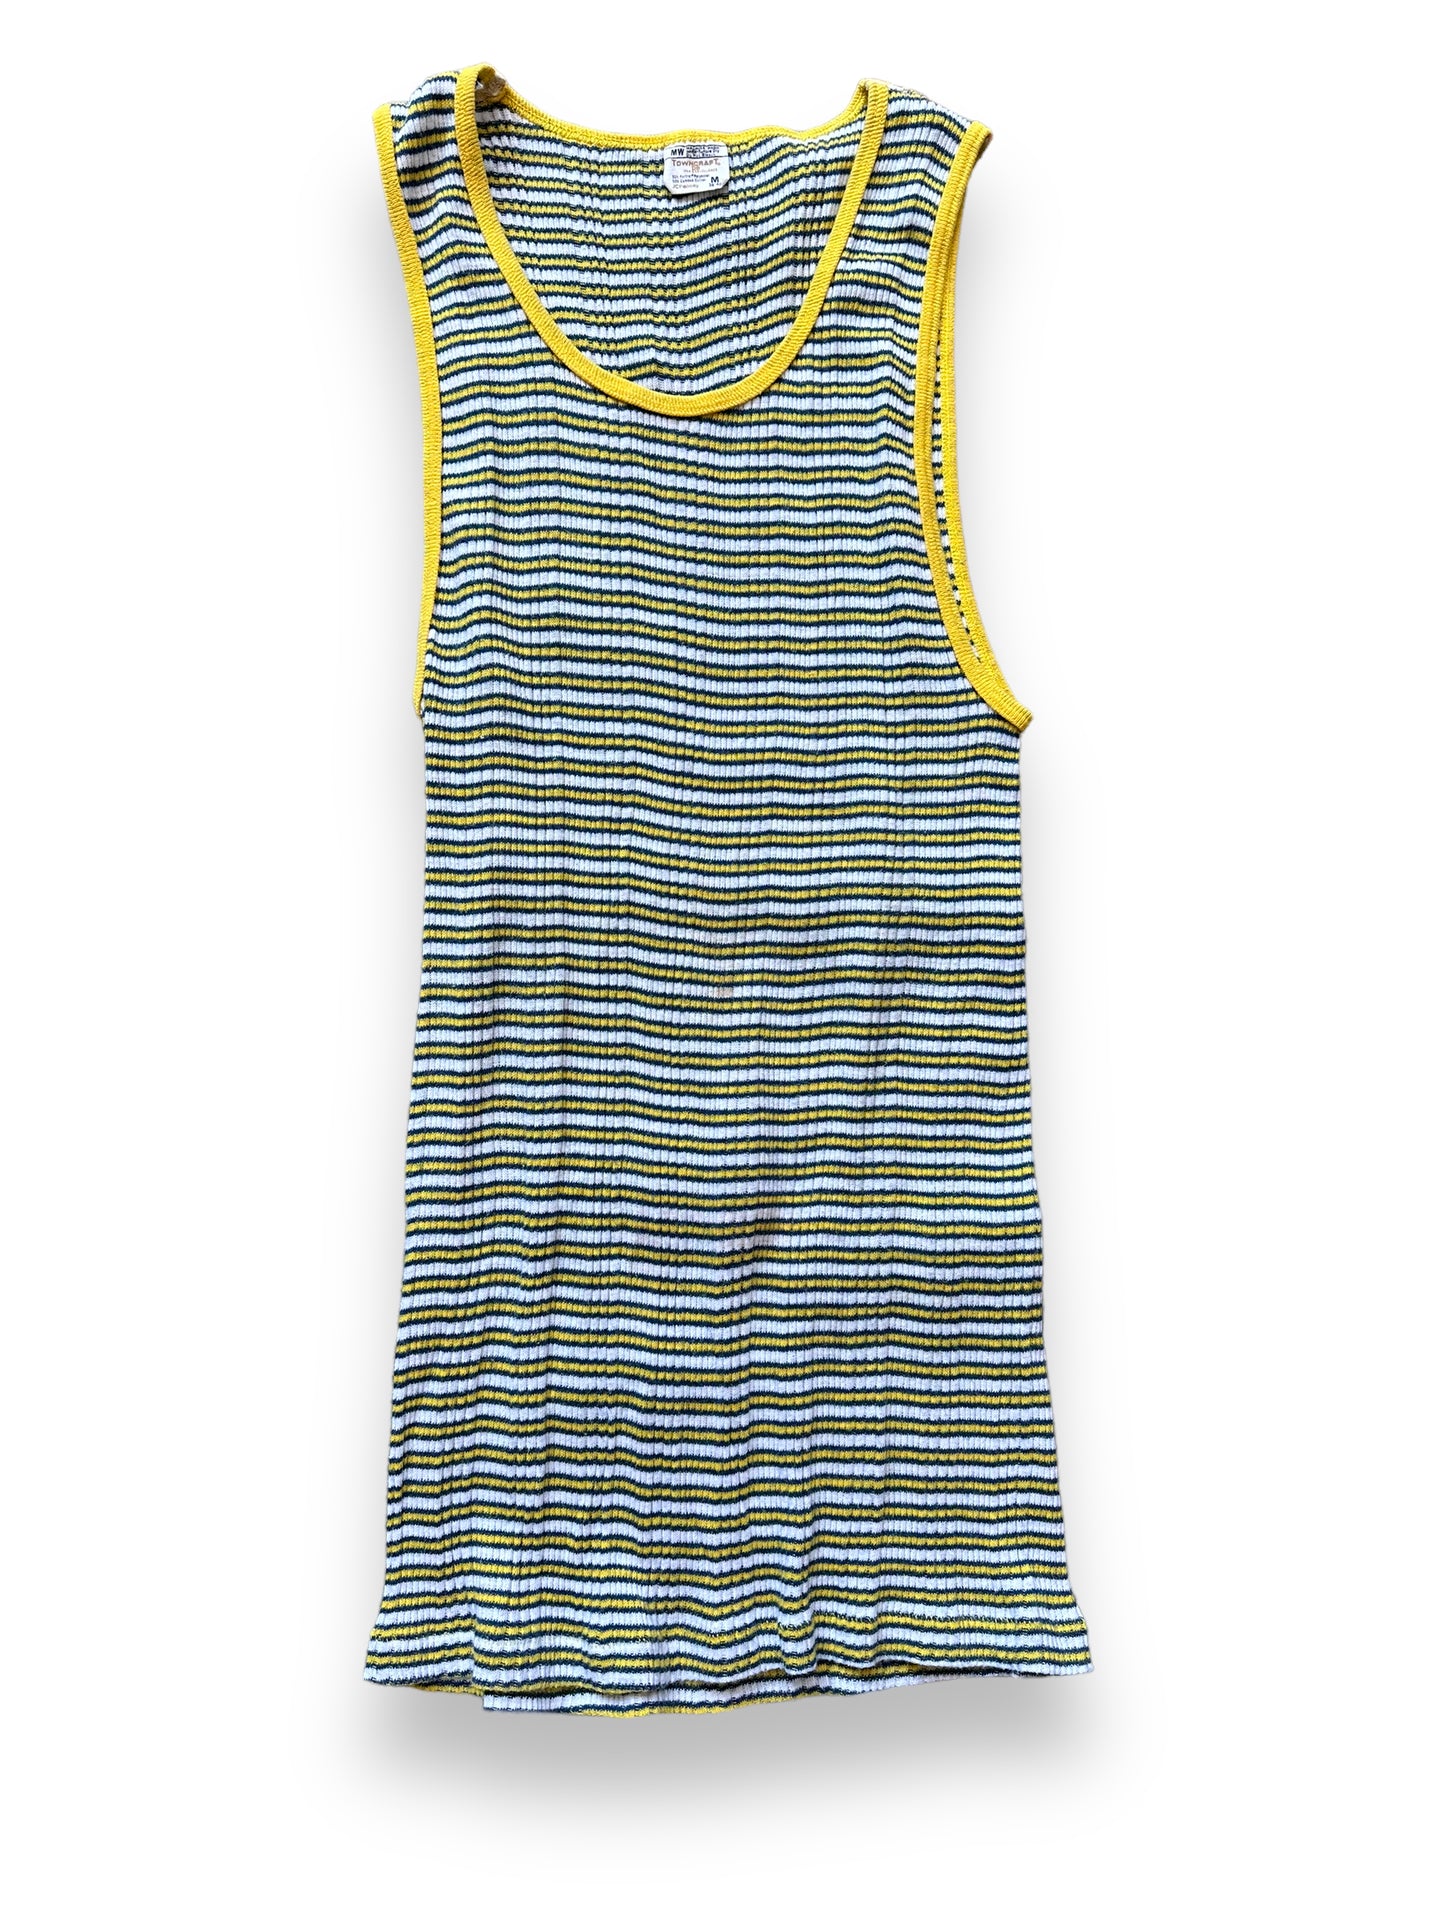 Front View of Vintage Towncraft Striped Tank Top SZ M | Vintage Tank Top Shirts Seattle | Barn Owl Vintage Tees Seattle